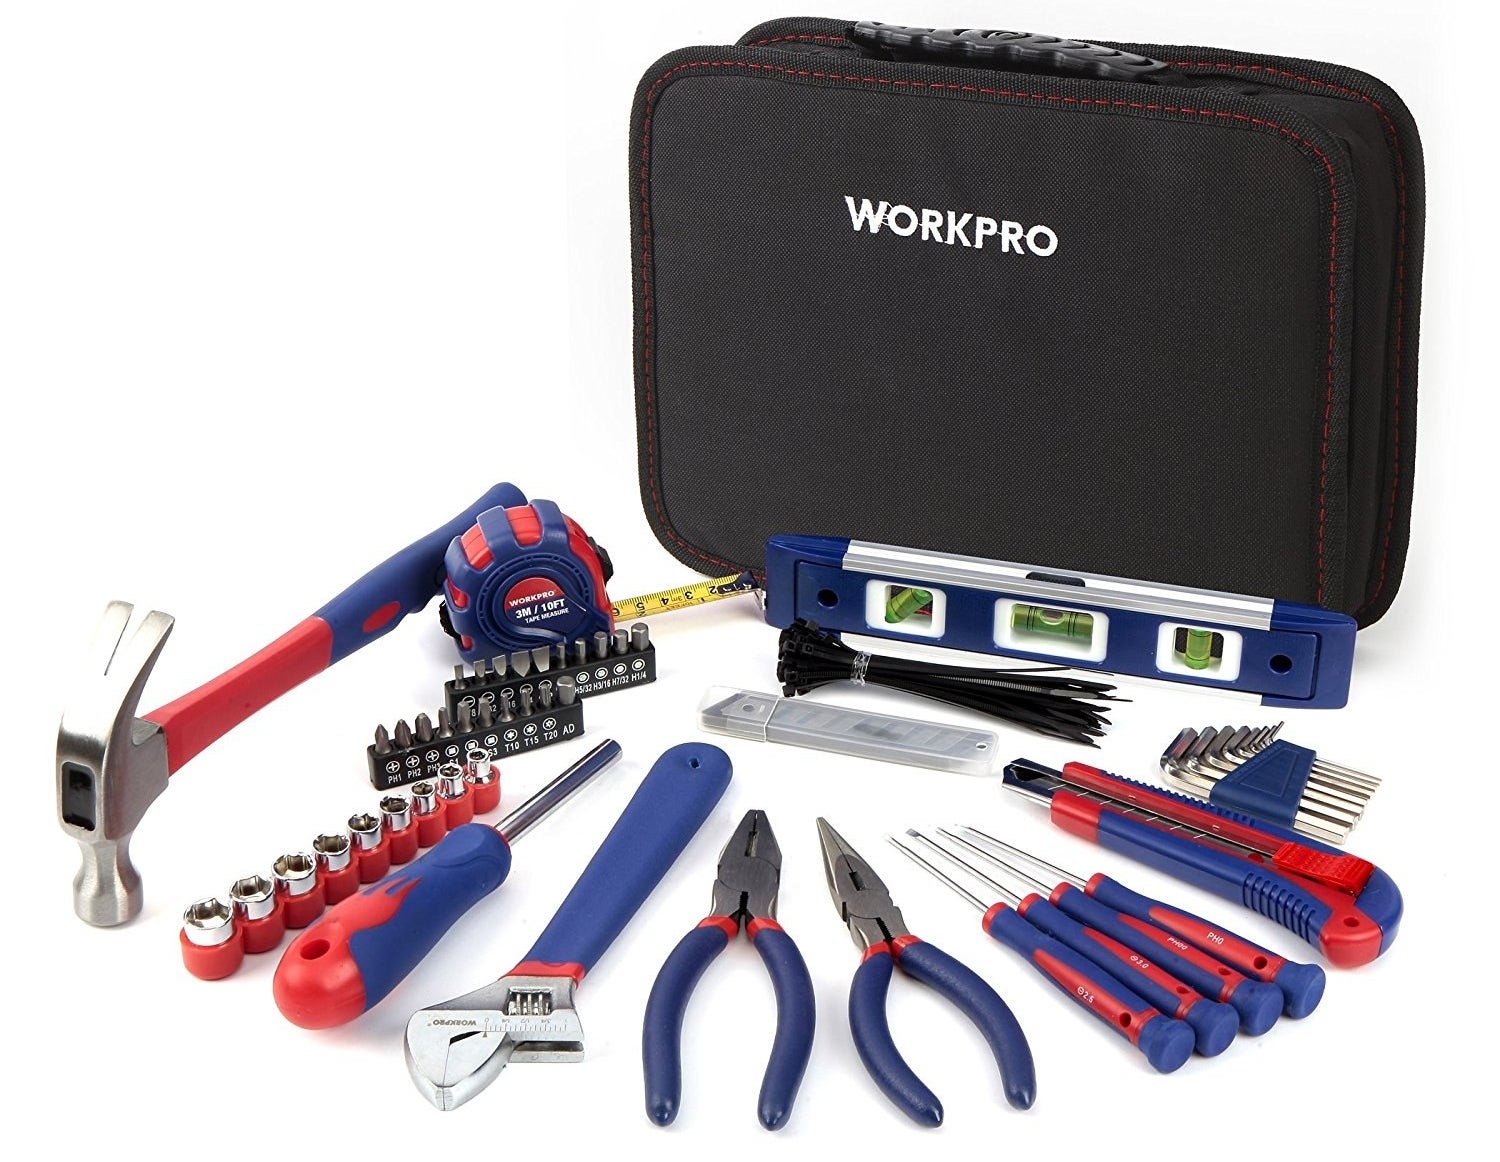 The Workpro tool set